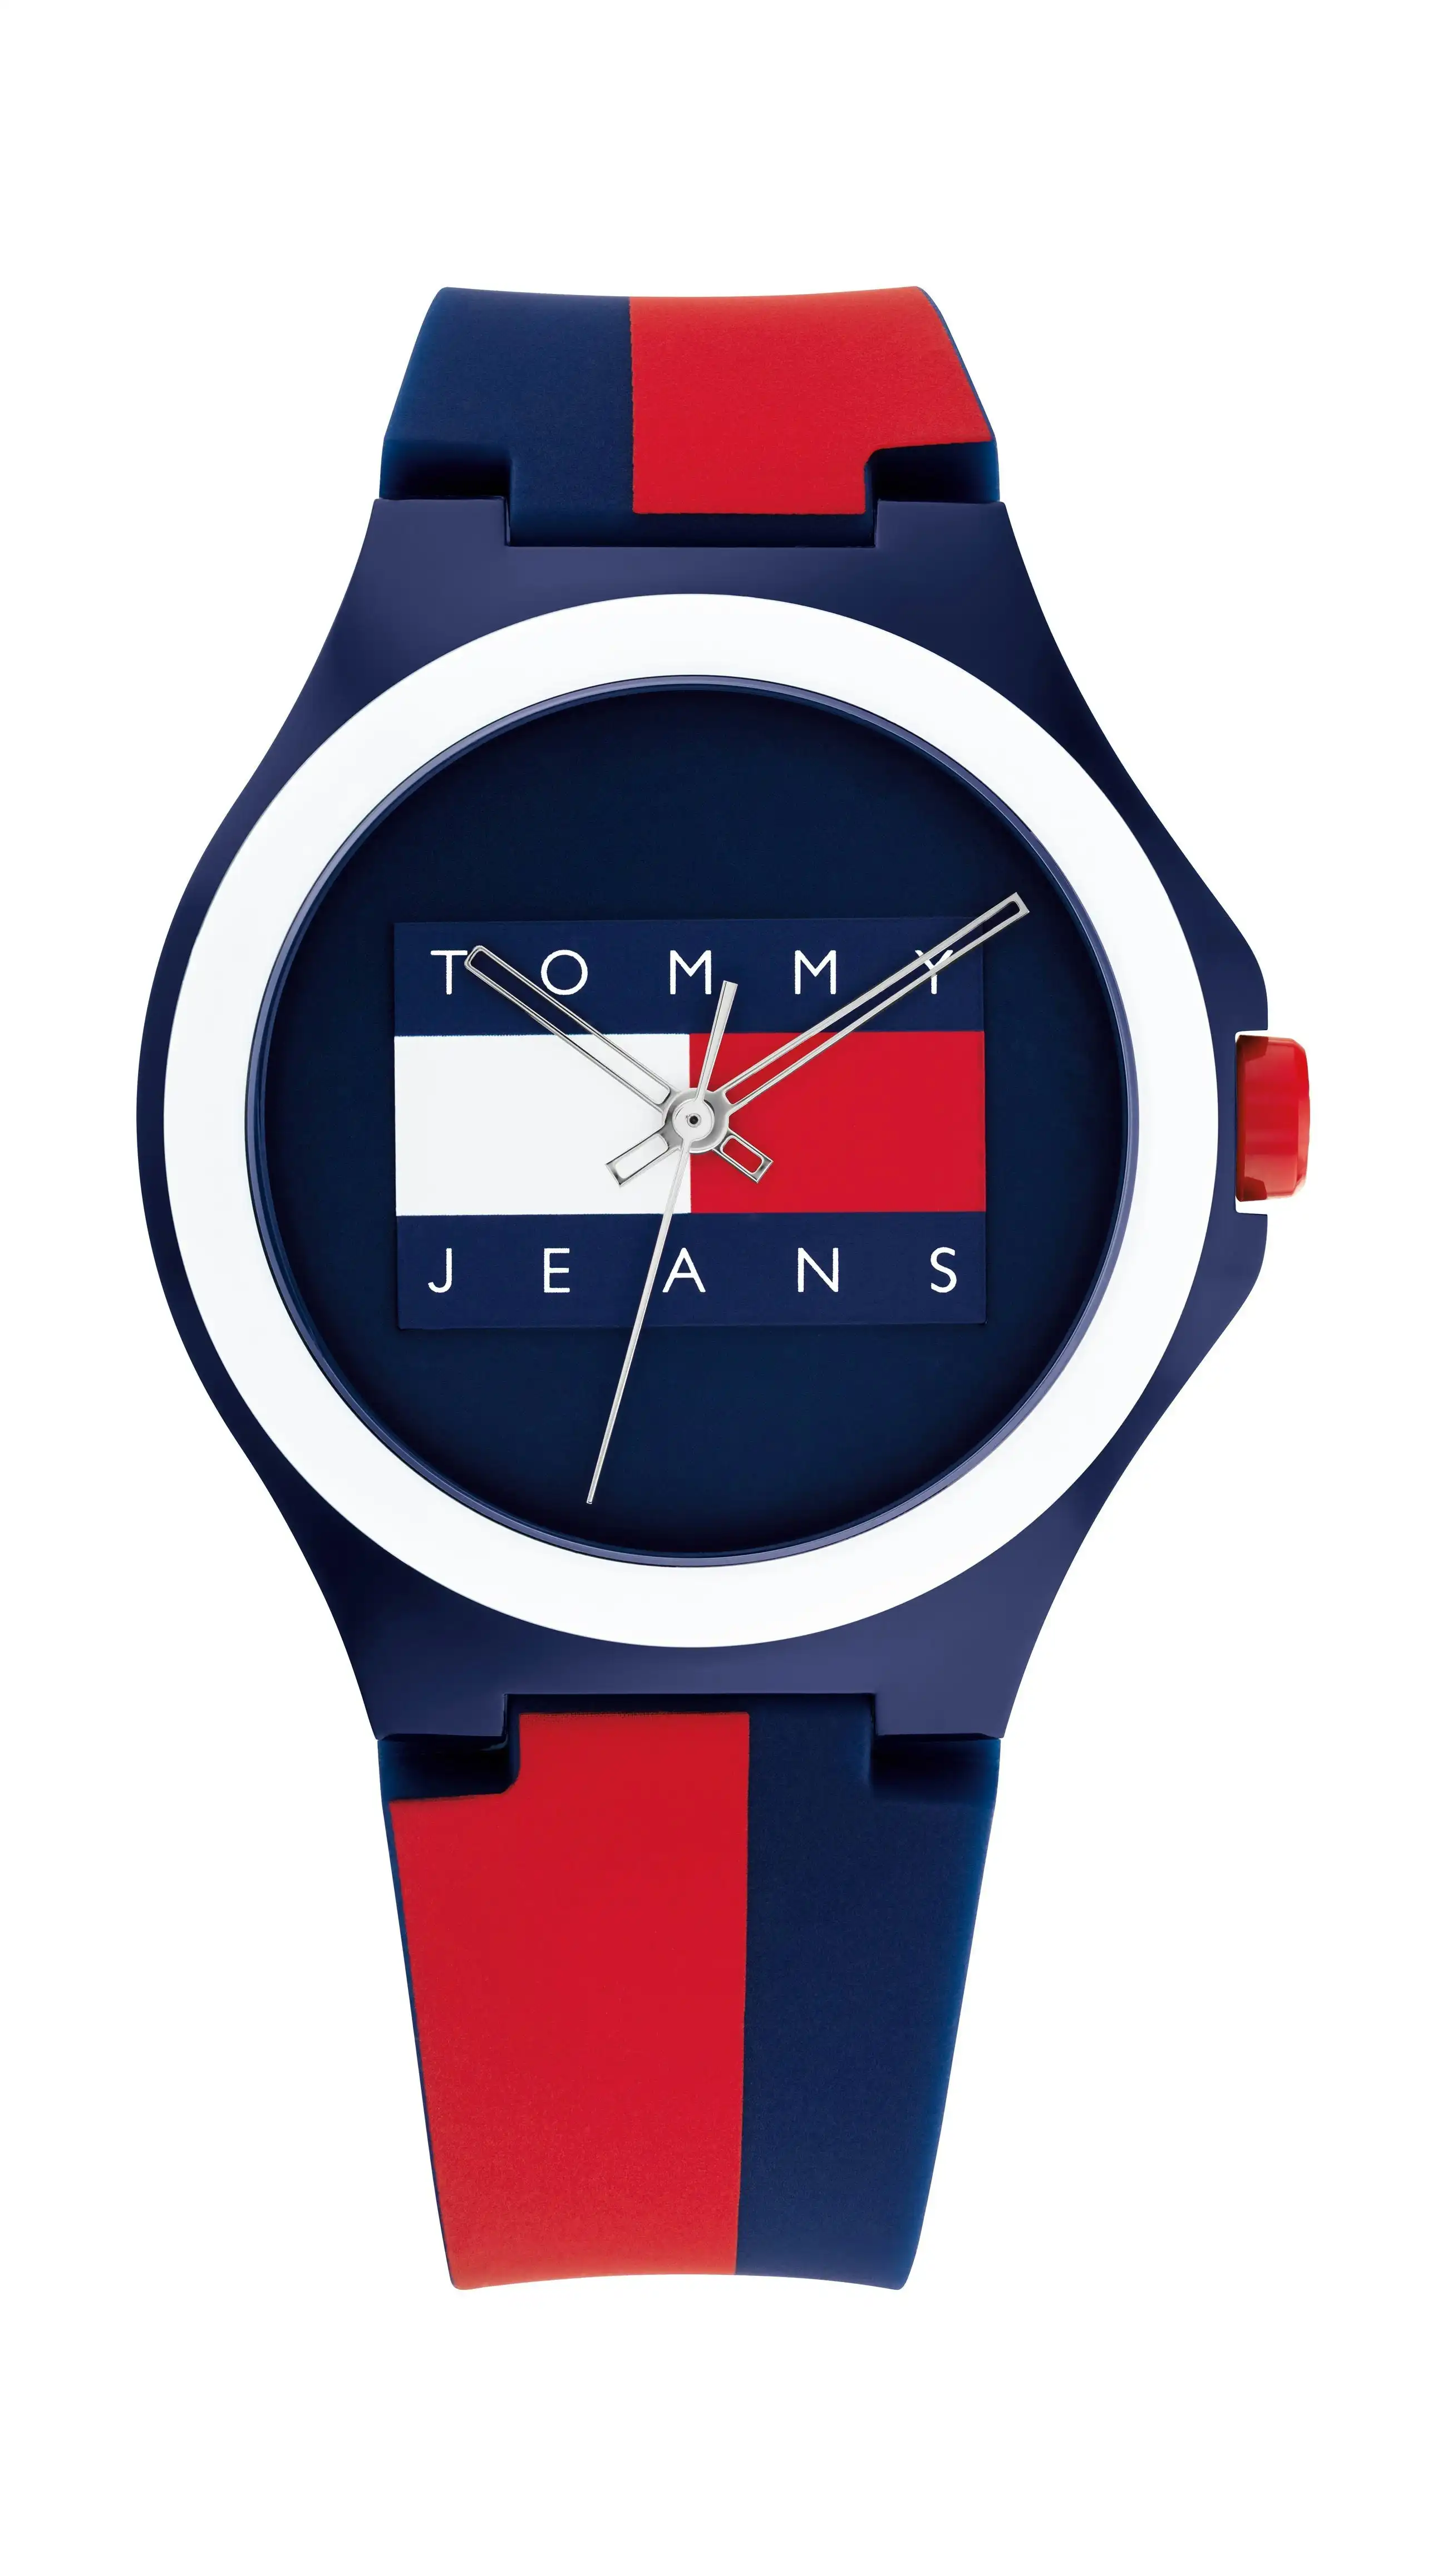 Tommy Hilfiger Berlin Red and Blue Men's Watch 1720025